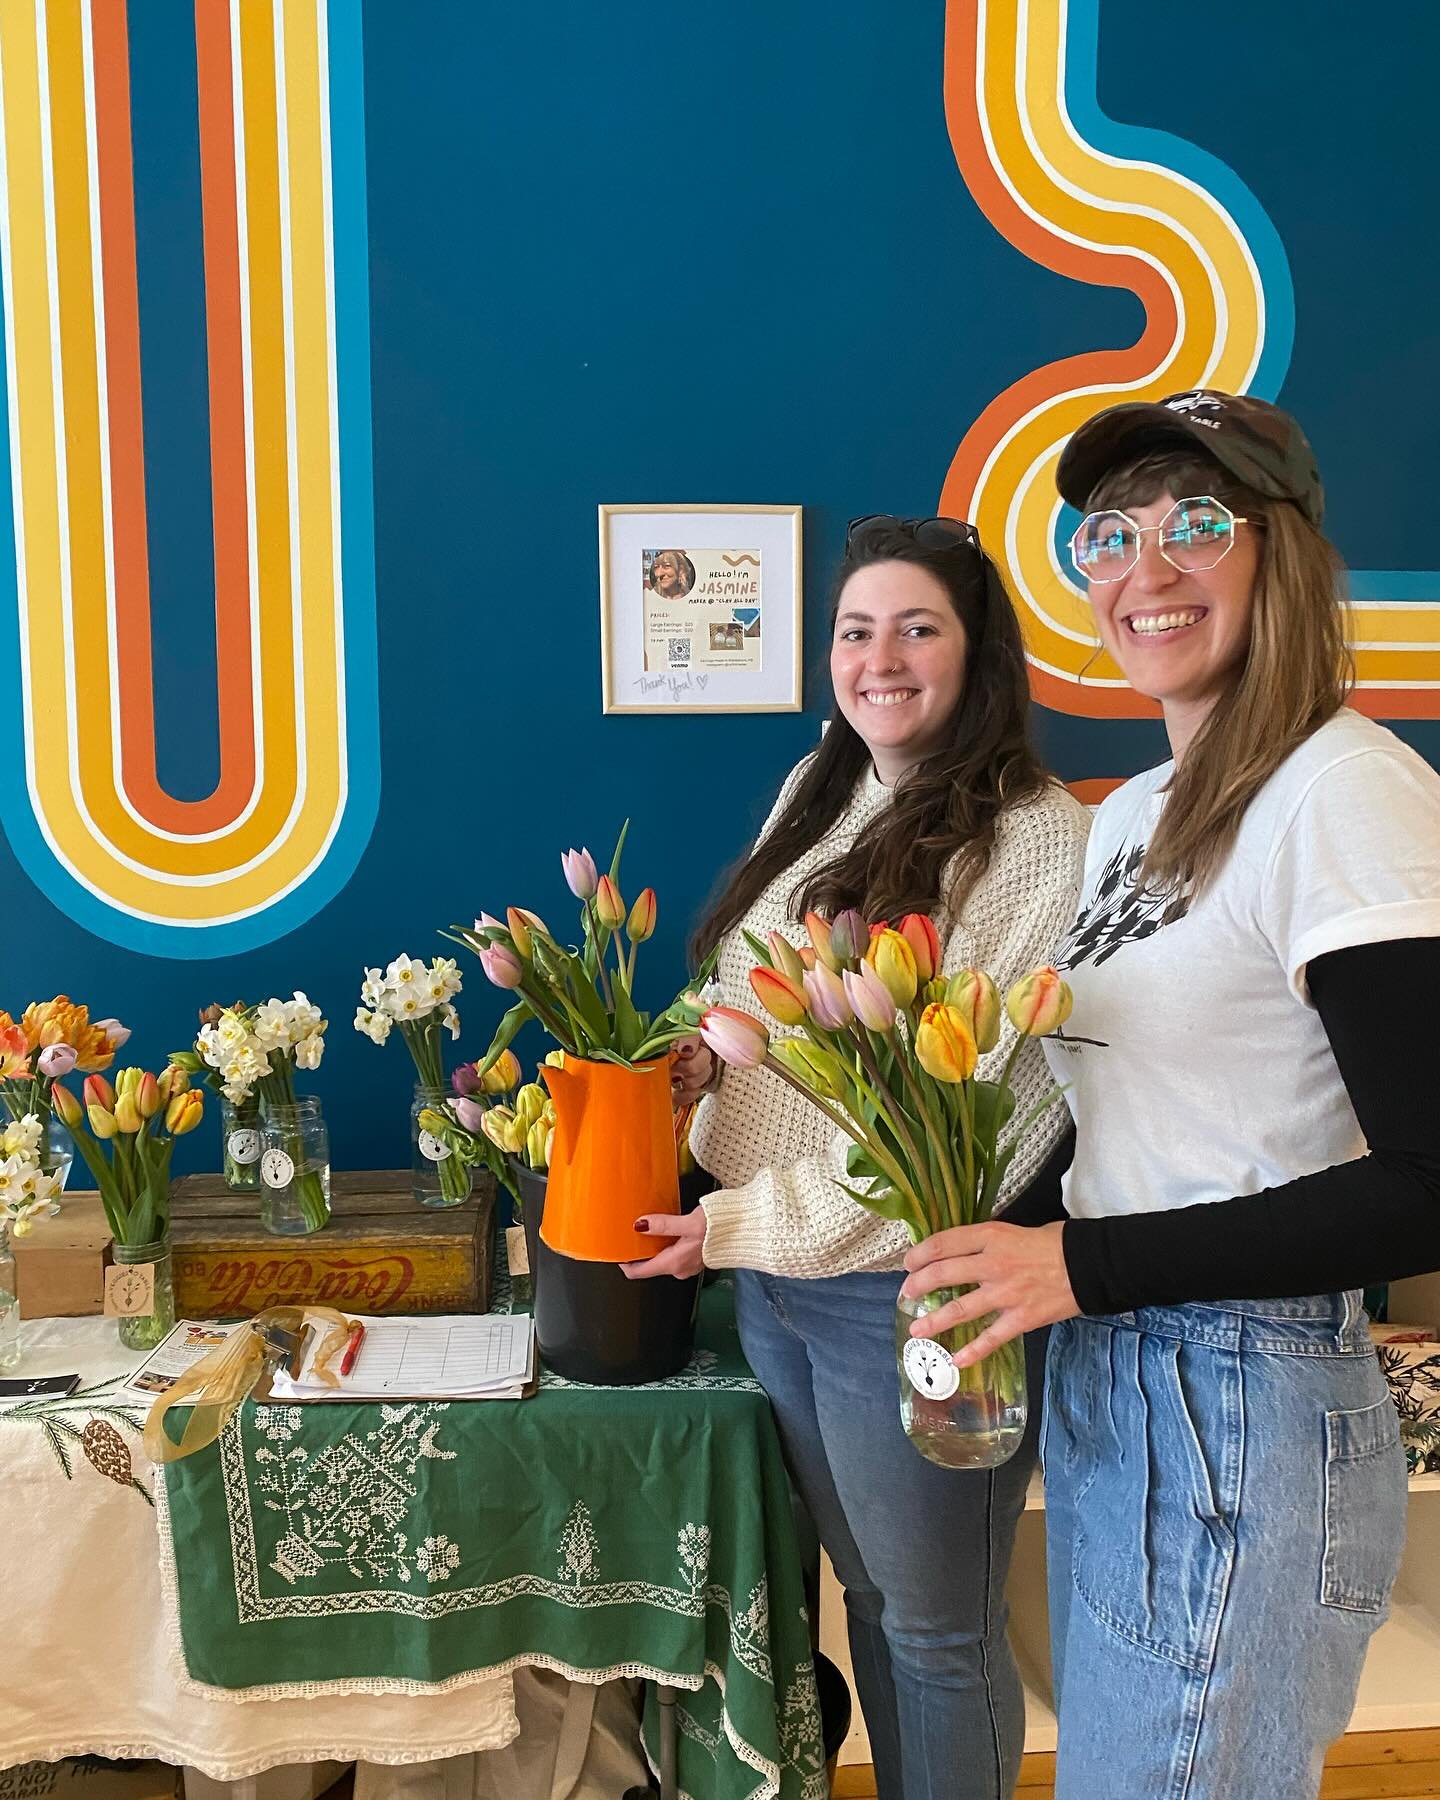 Good times at @perchcafeandbakery today meeting the community, talking about hunger, and selling our flowers. Thanks for having us ! We never sell our produce as that always goes to feed our neighbors in need but we do sometimes sell the flowers (mos